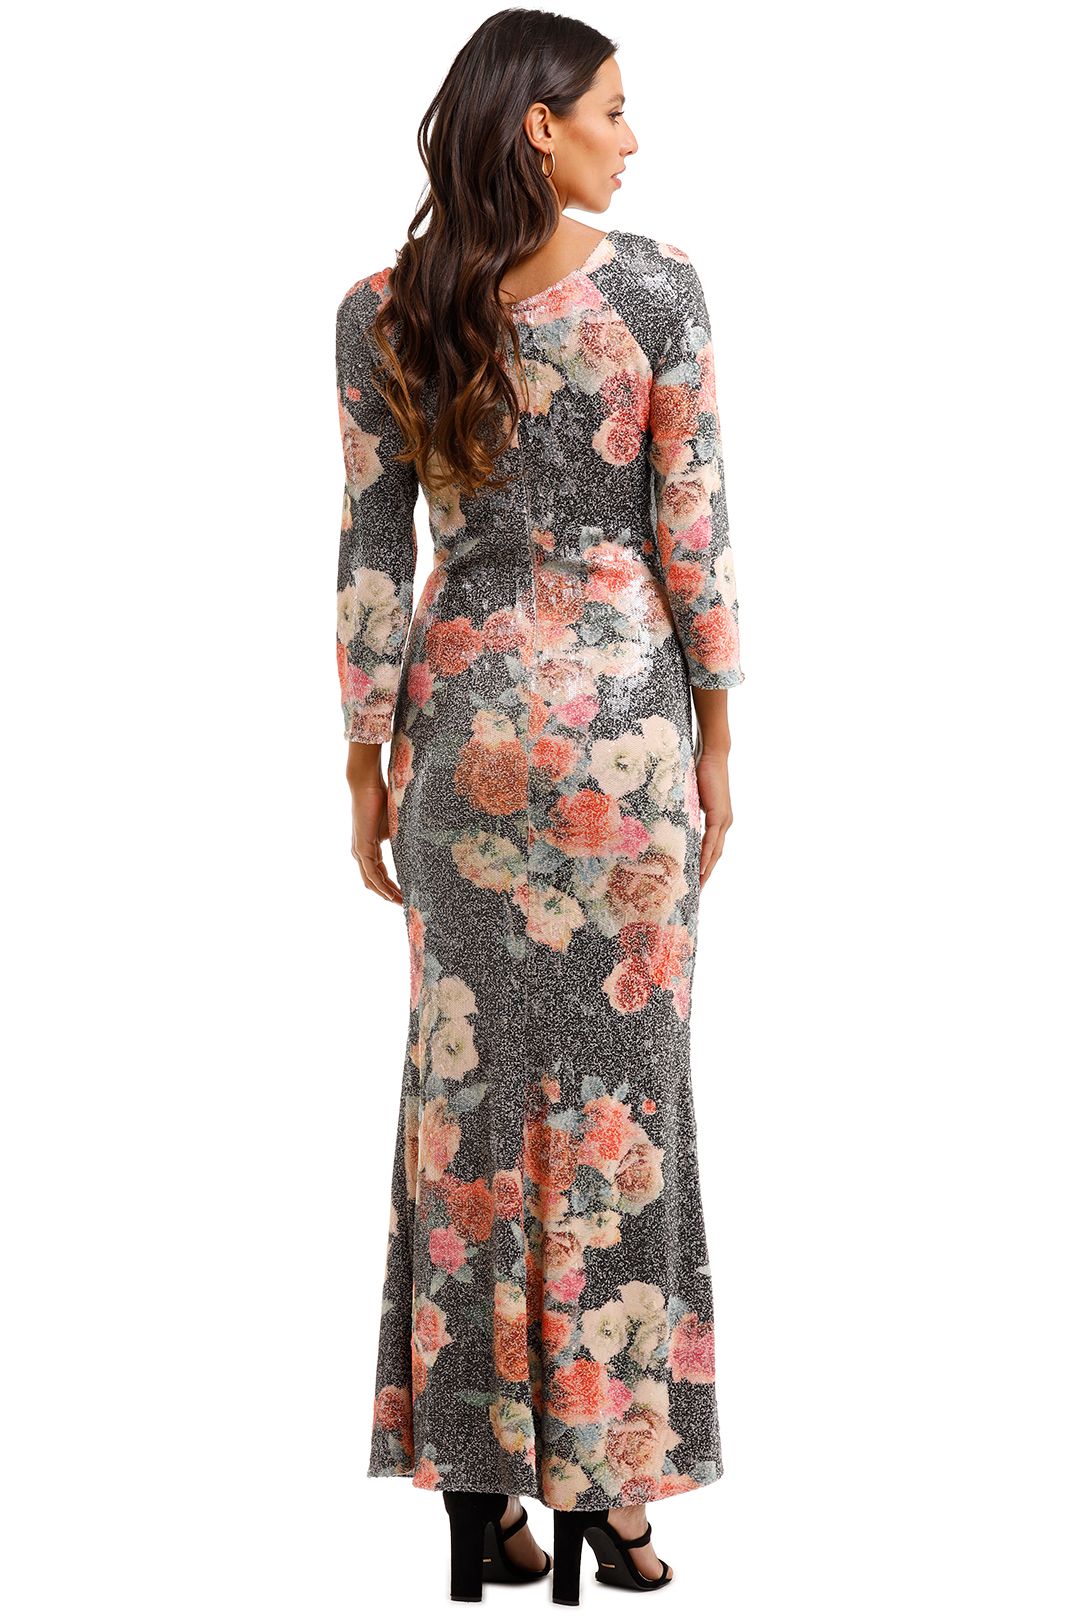 Moss and Spy	Matisse Gown Floral Multi